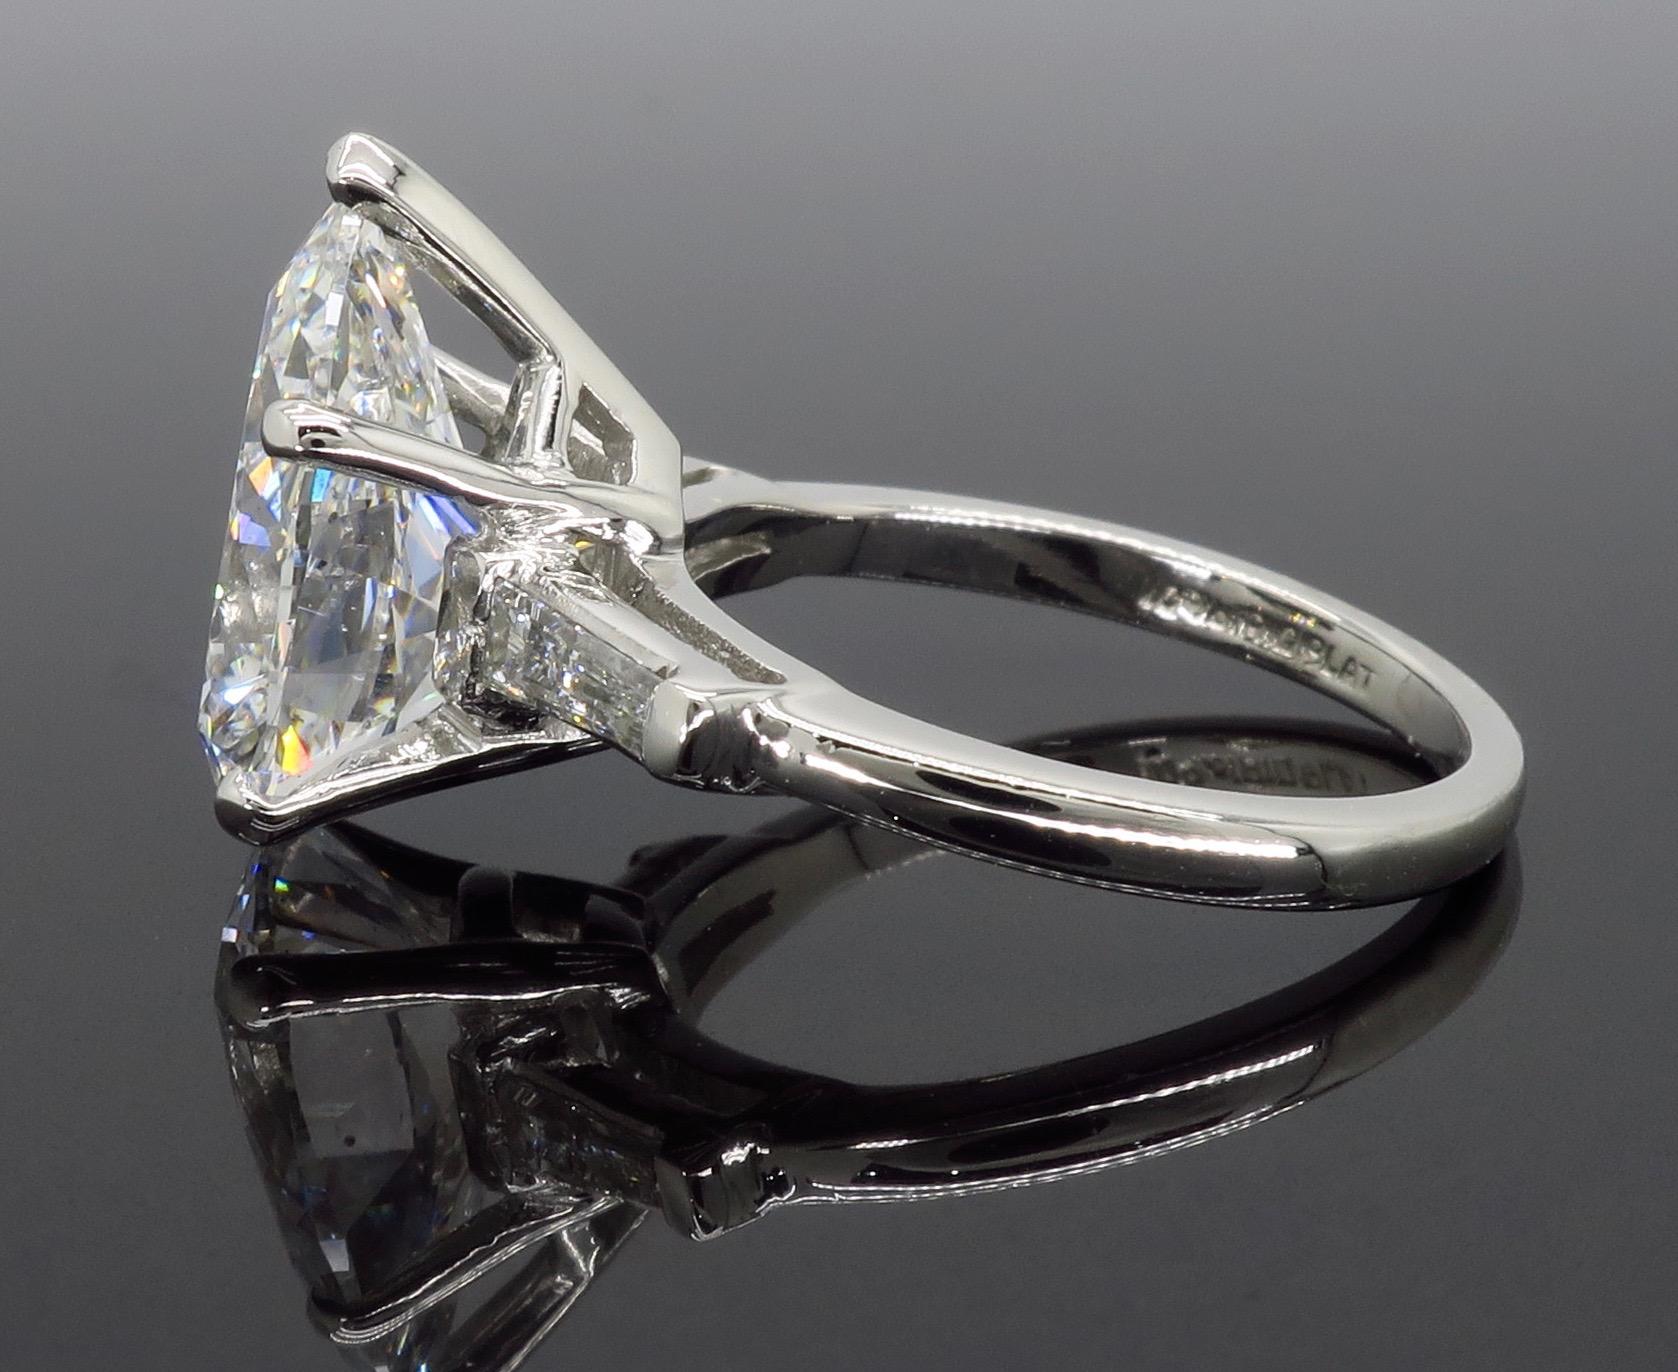 GIA Certified 4.83 Carat Pear Shaped Diamond Engagement Ring in Platinum 1